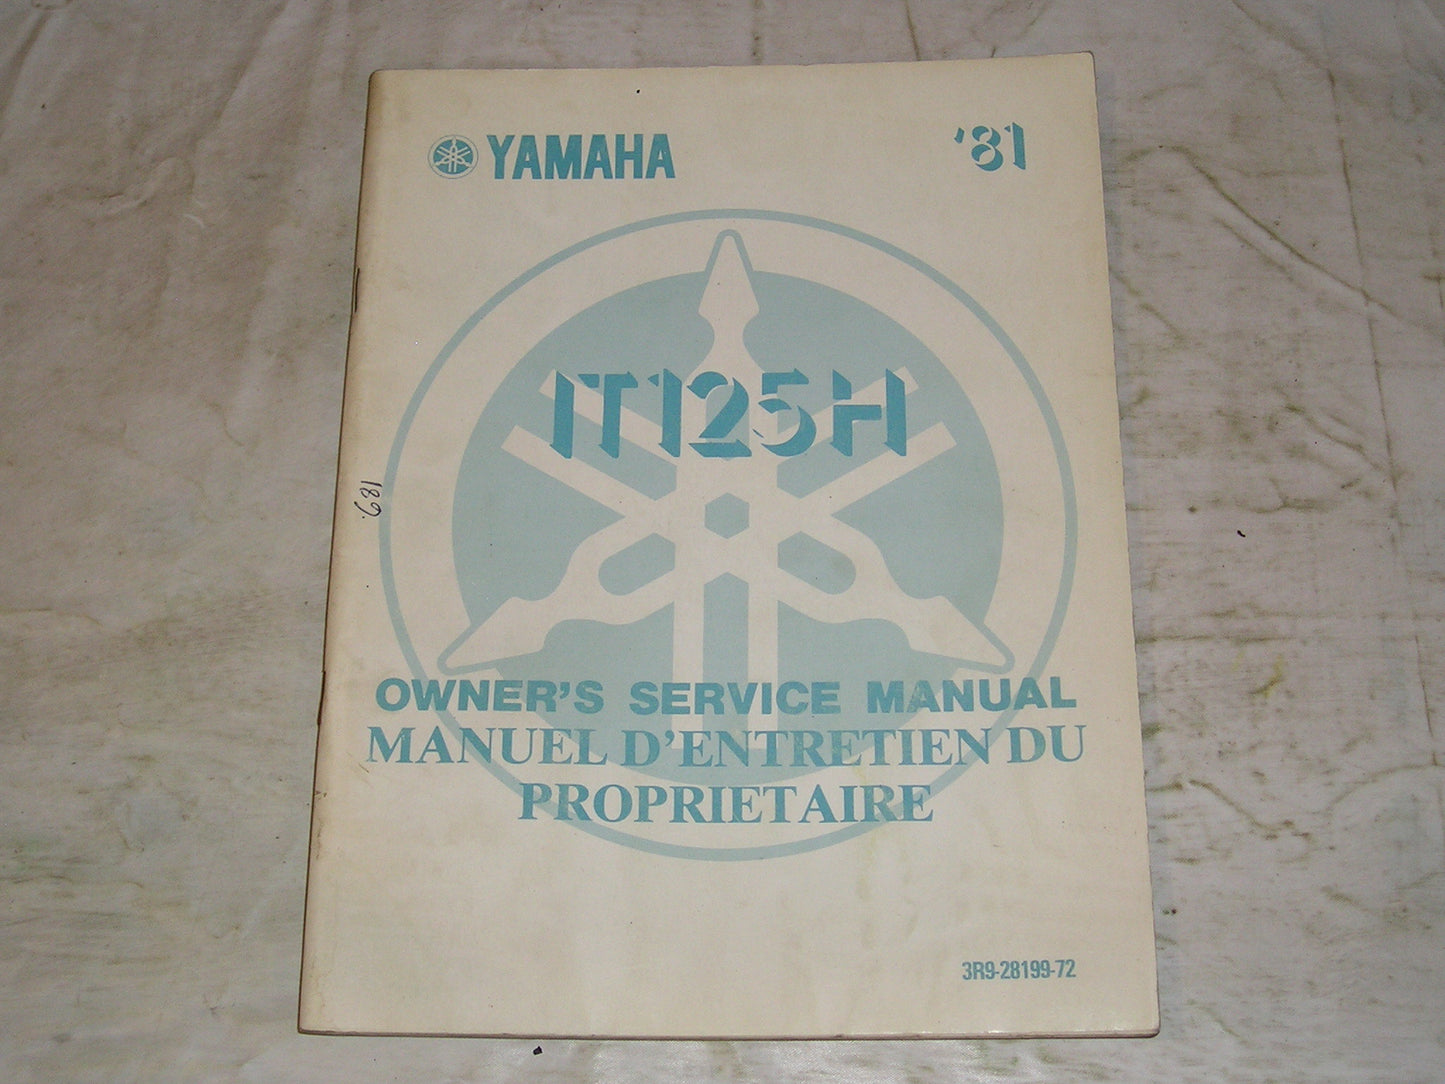 YAMAHA IT125 H Owner's Service Manual  3R9-28199-72   #681